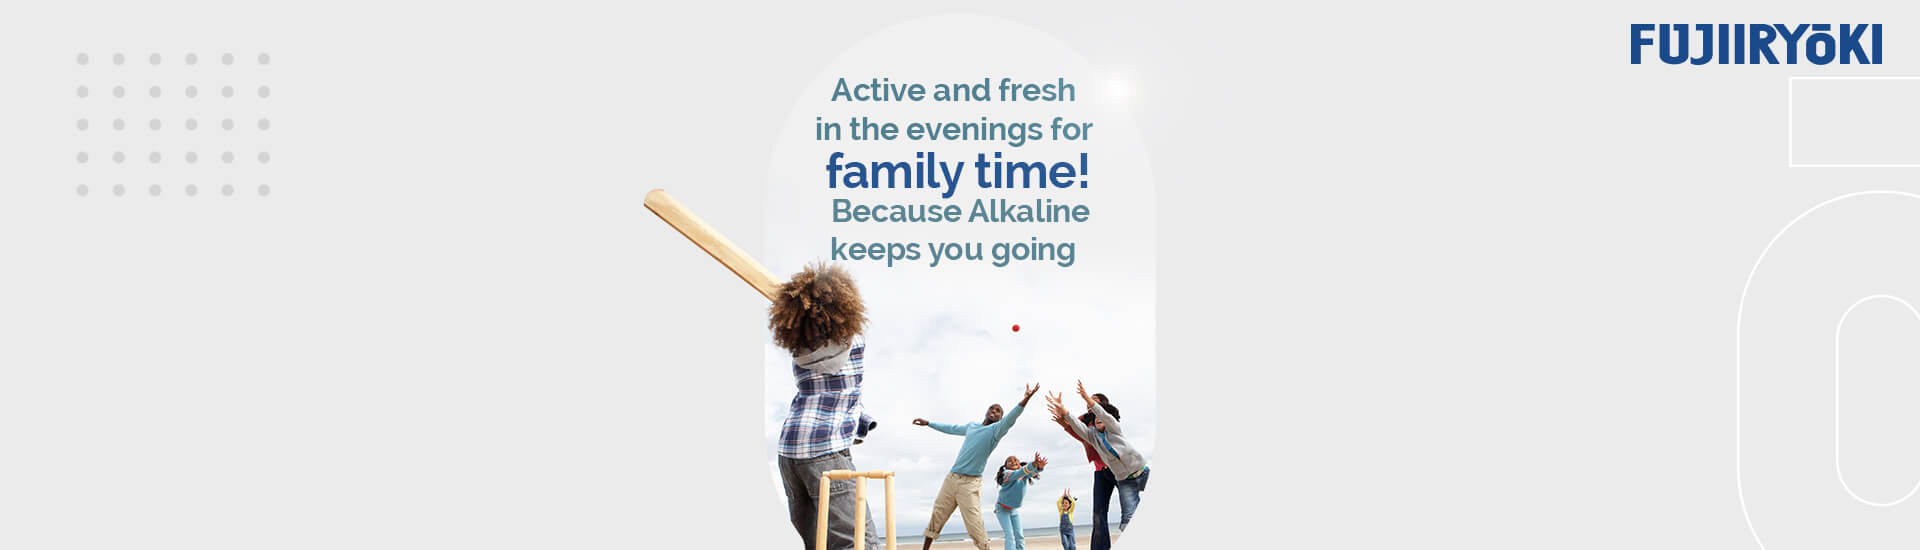 Stay active in the evenings for family time because Alkaline keeps you going